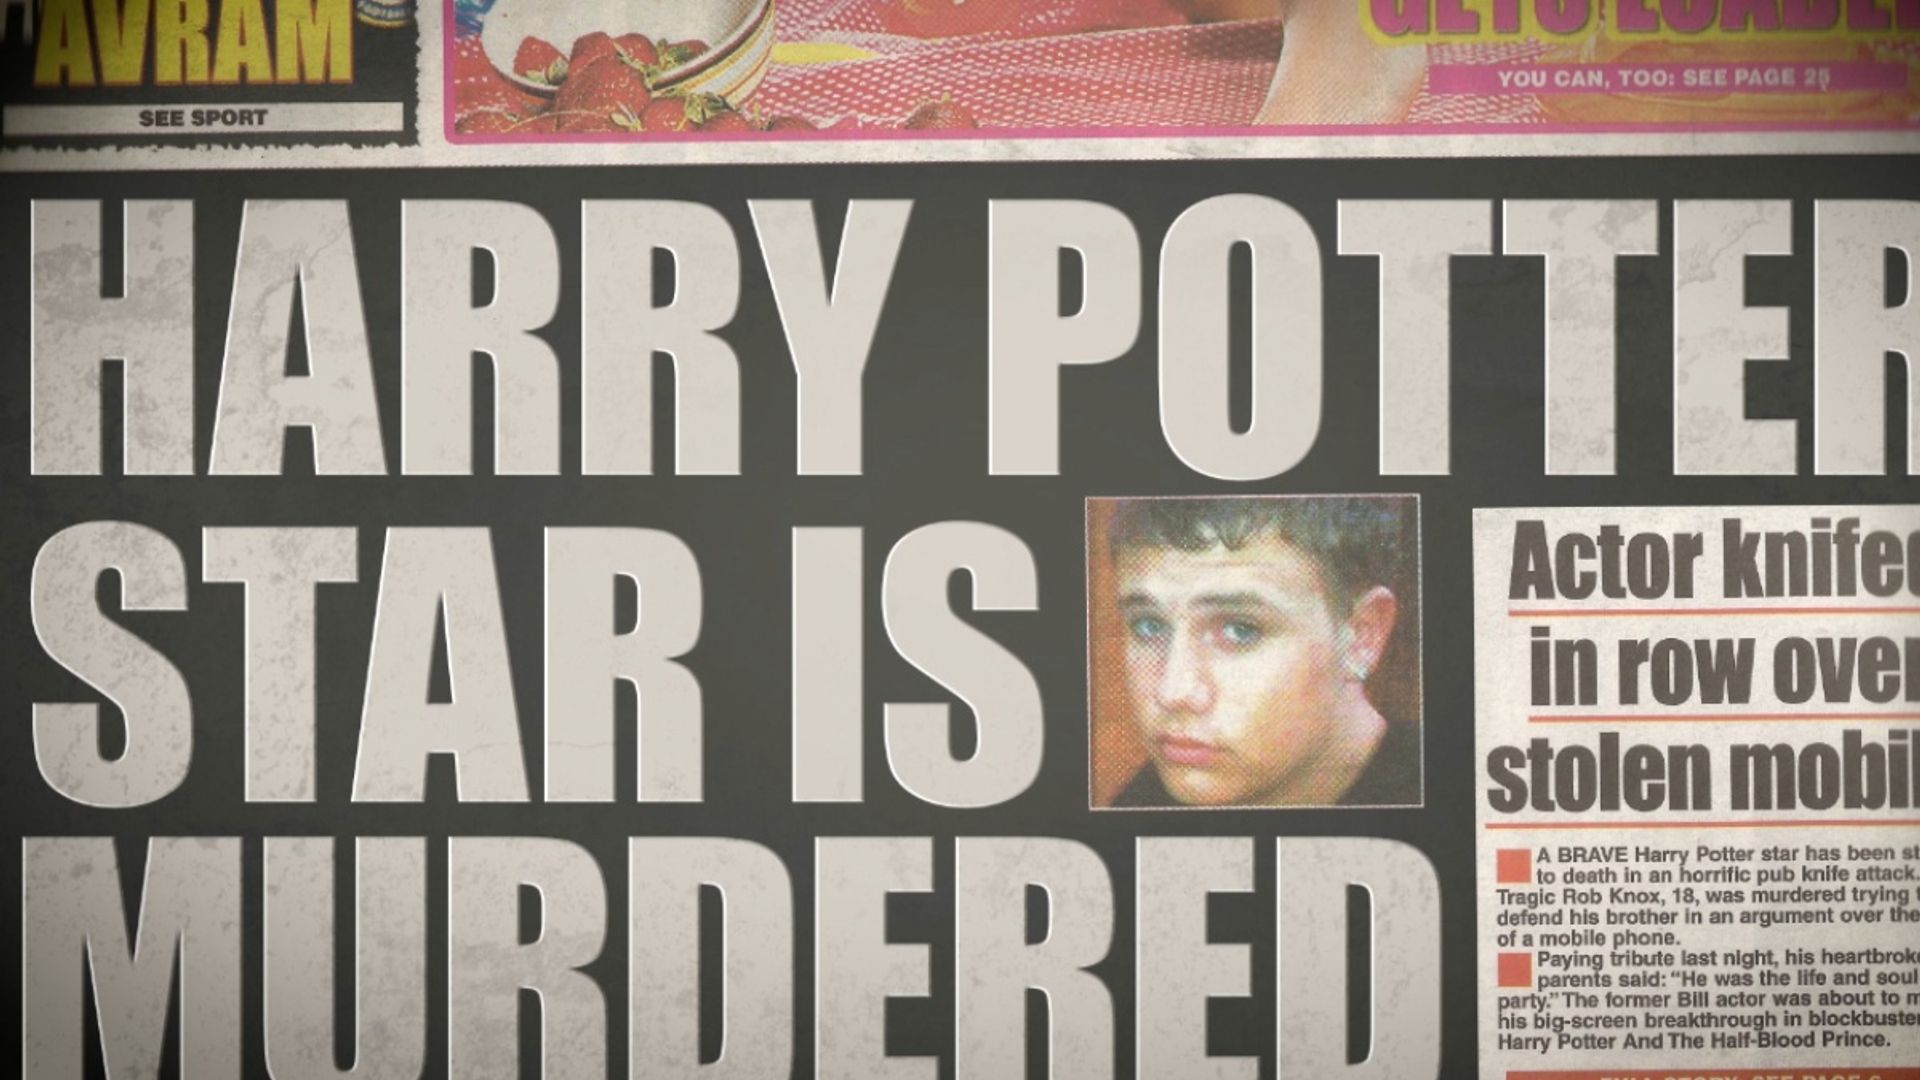 Harry Potter star's murder to be subject of ITV documentary – details